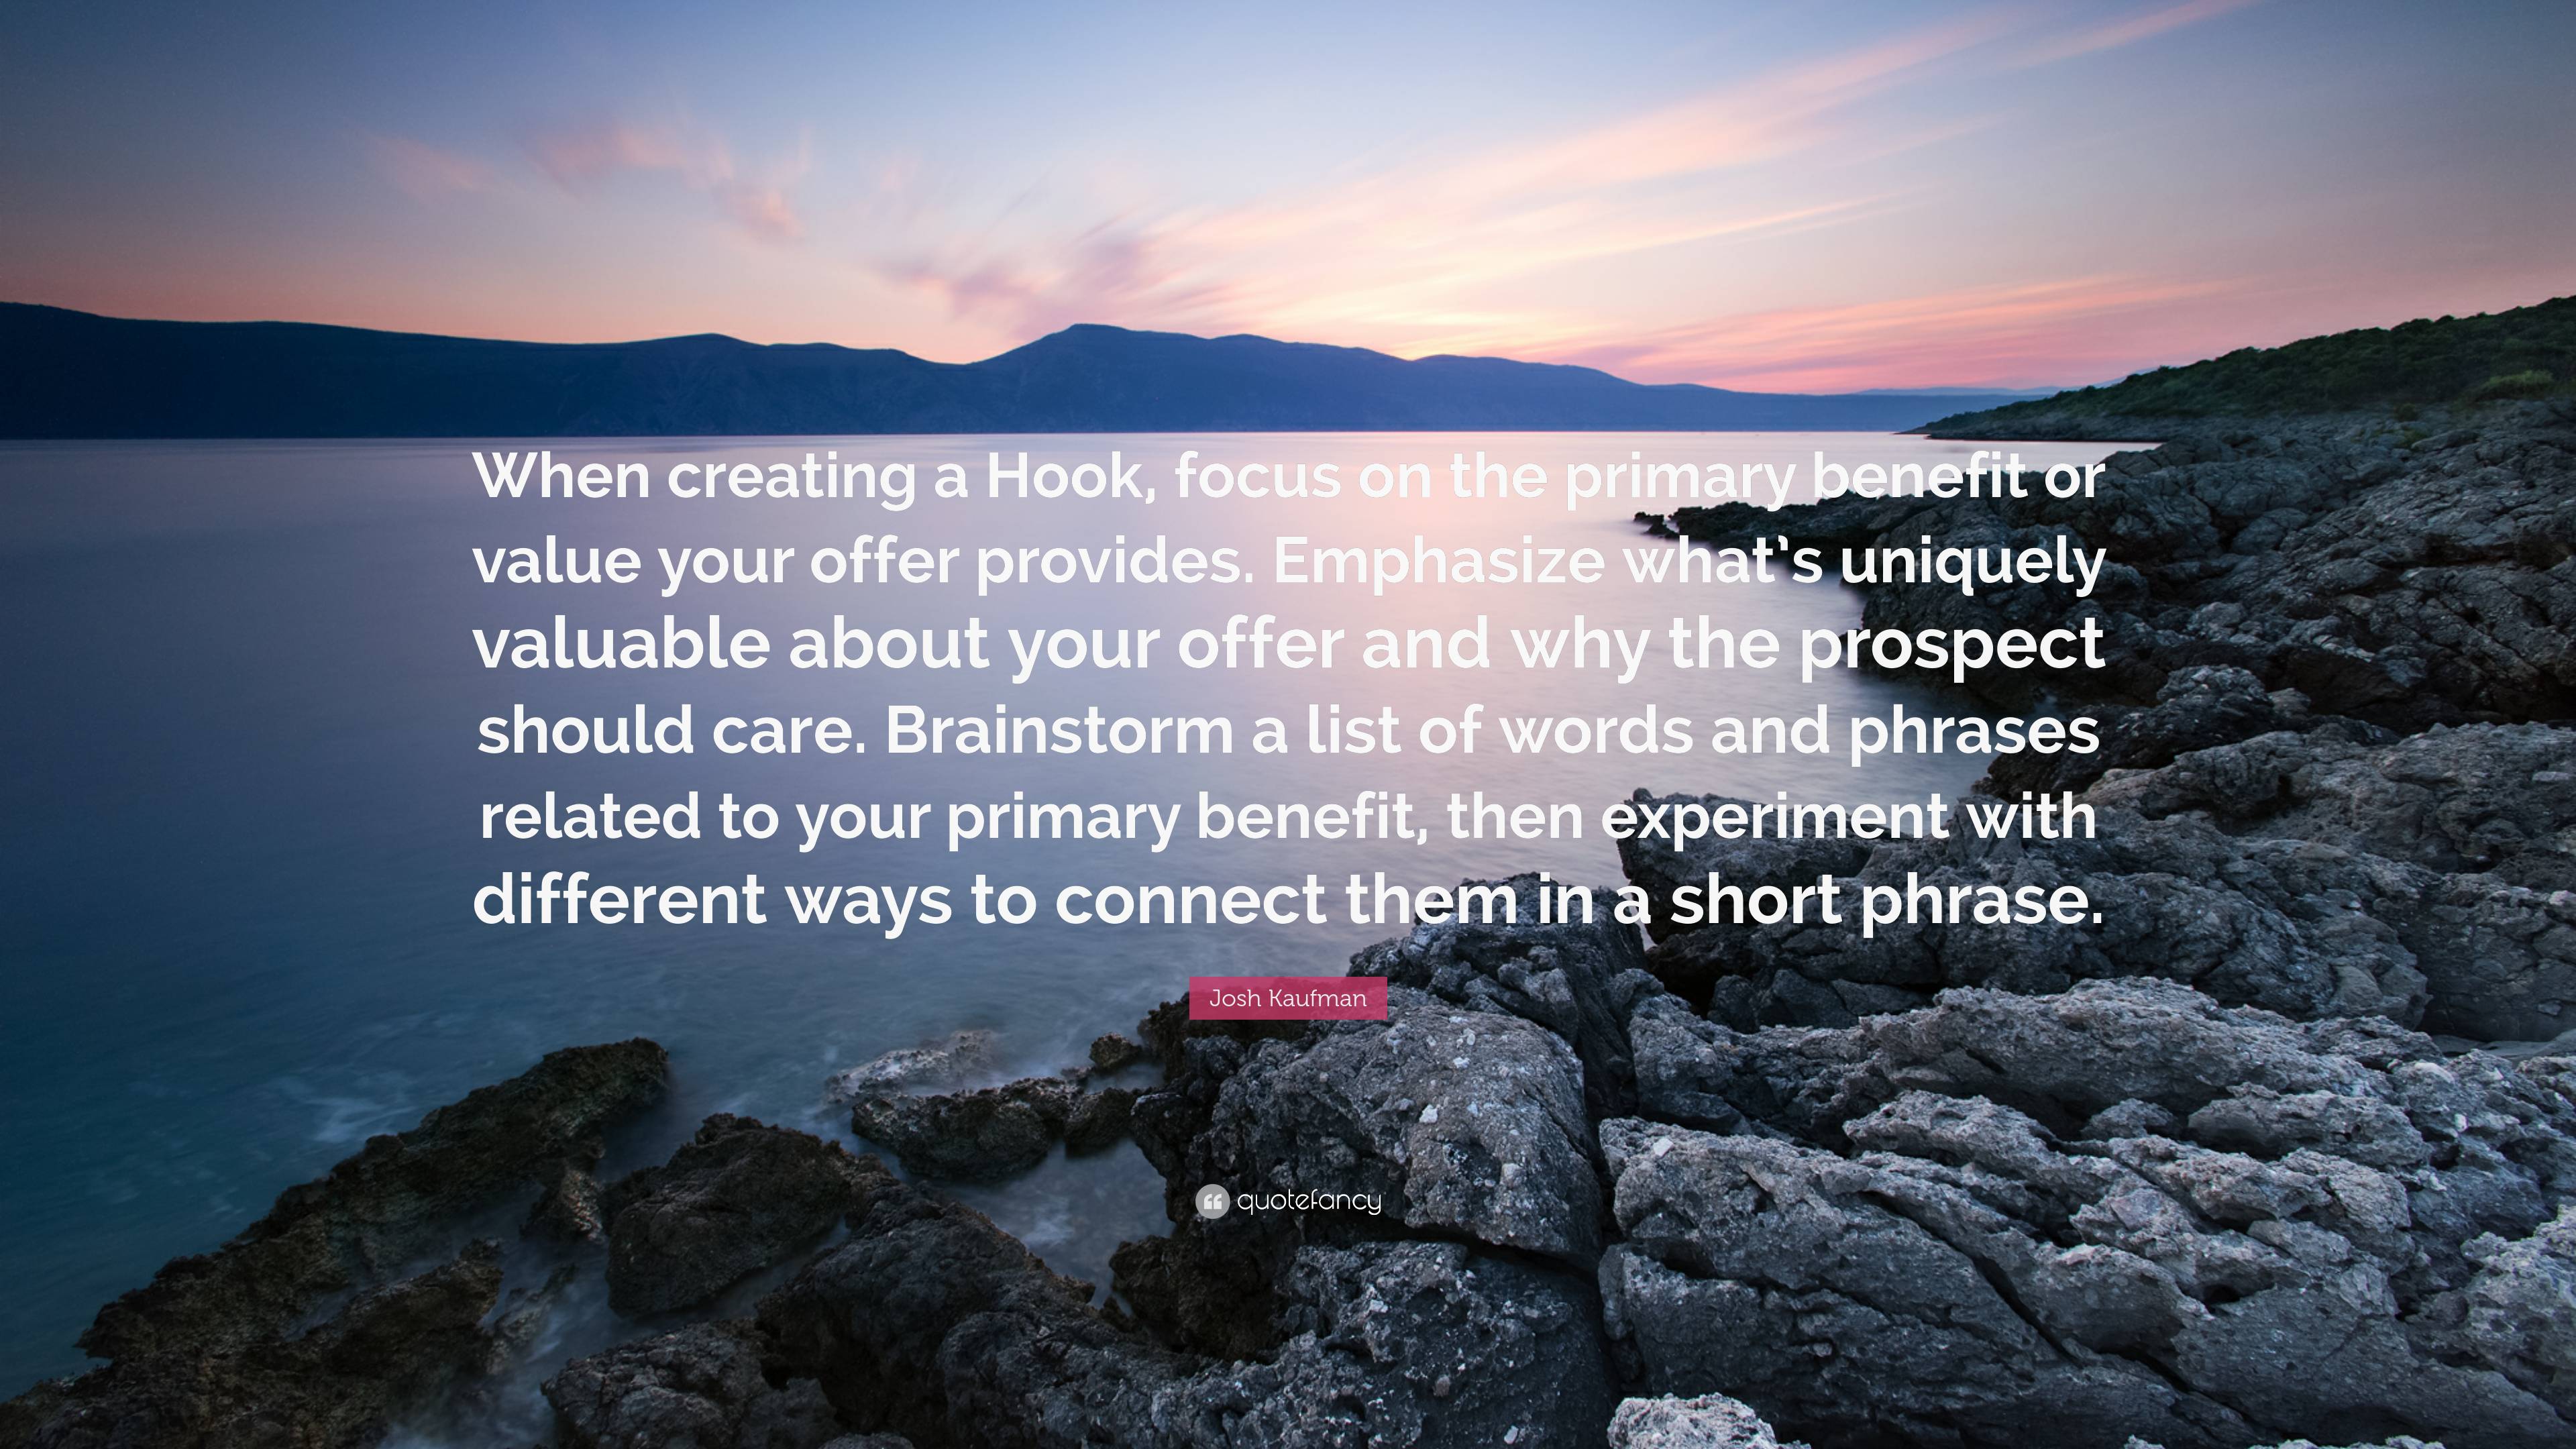 Josh Kaufman Quote: “When creating a Hook, focus on the primary